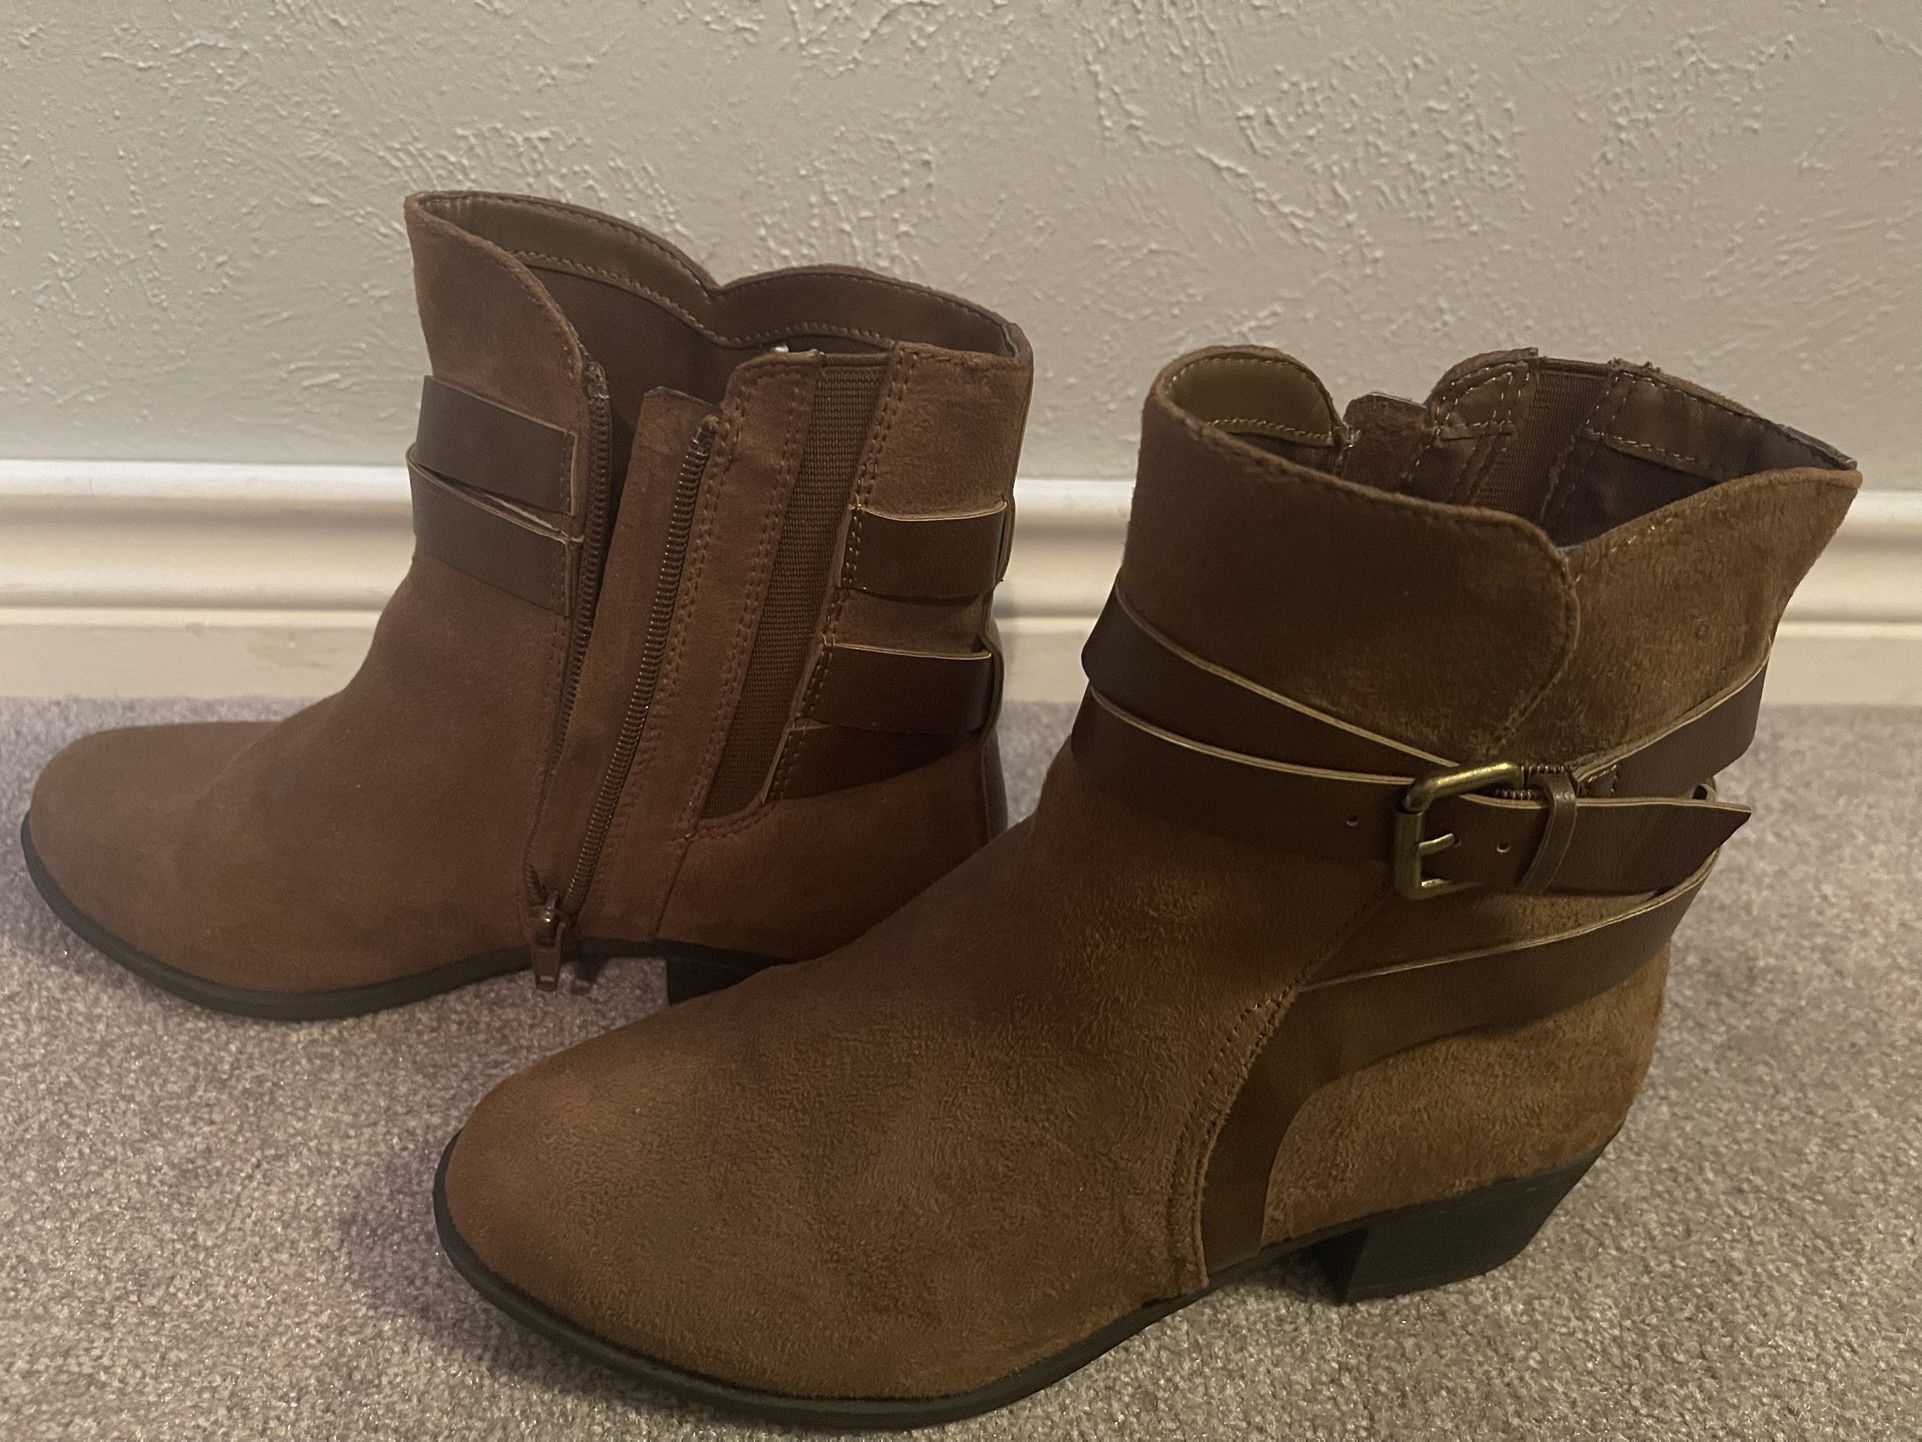 NEW Short/ankle Suede Boots